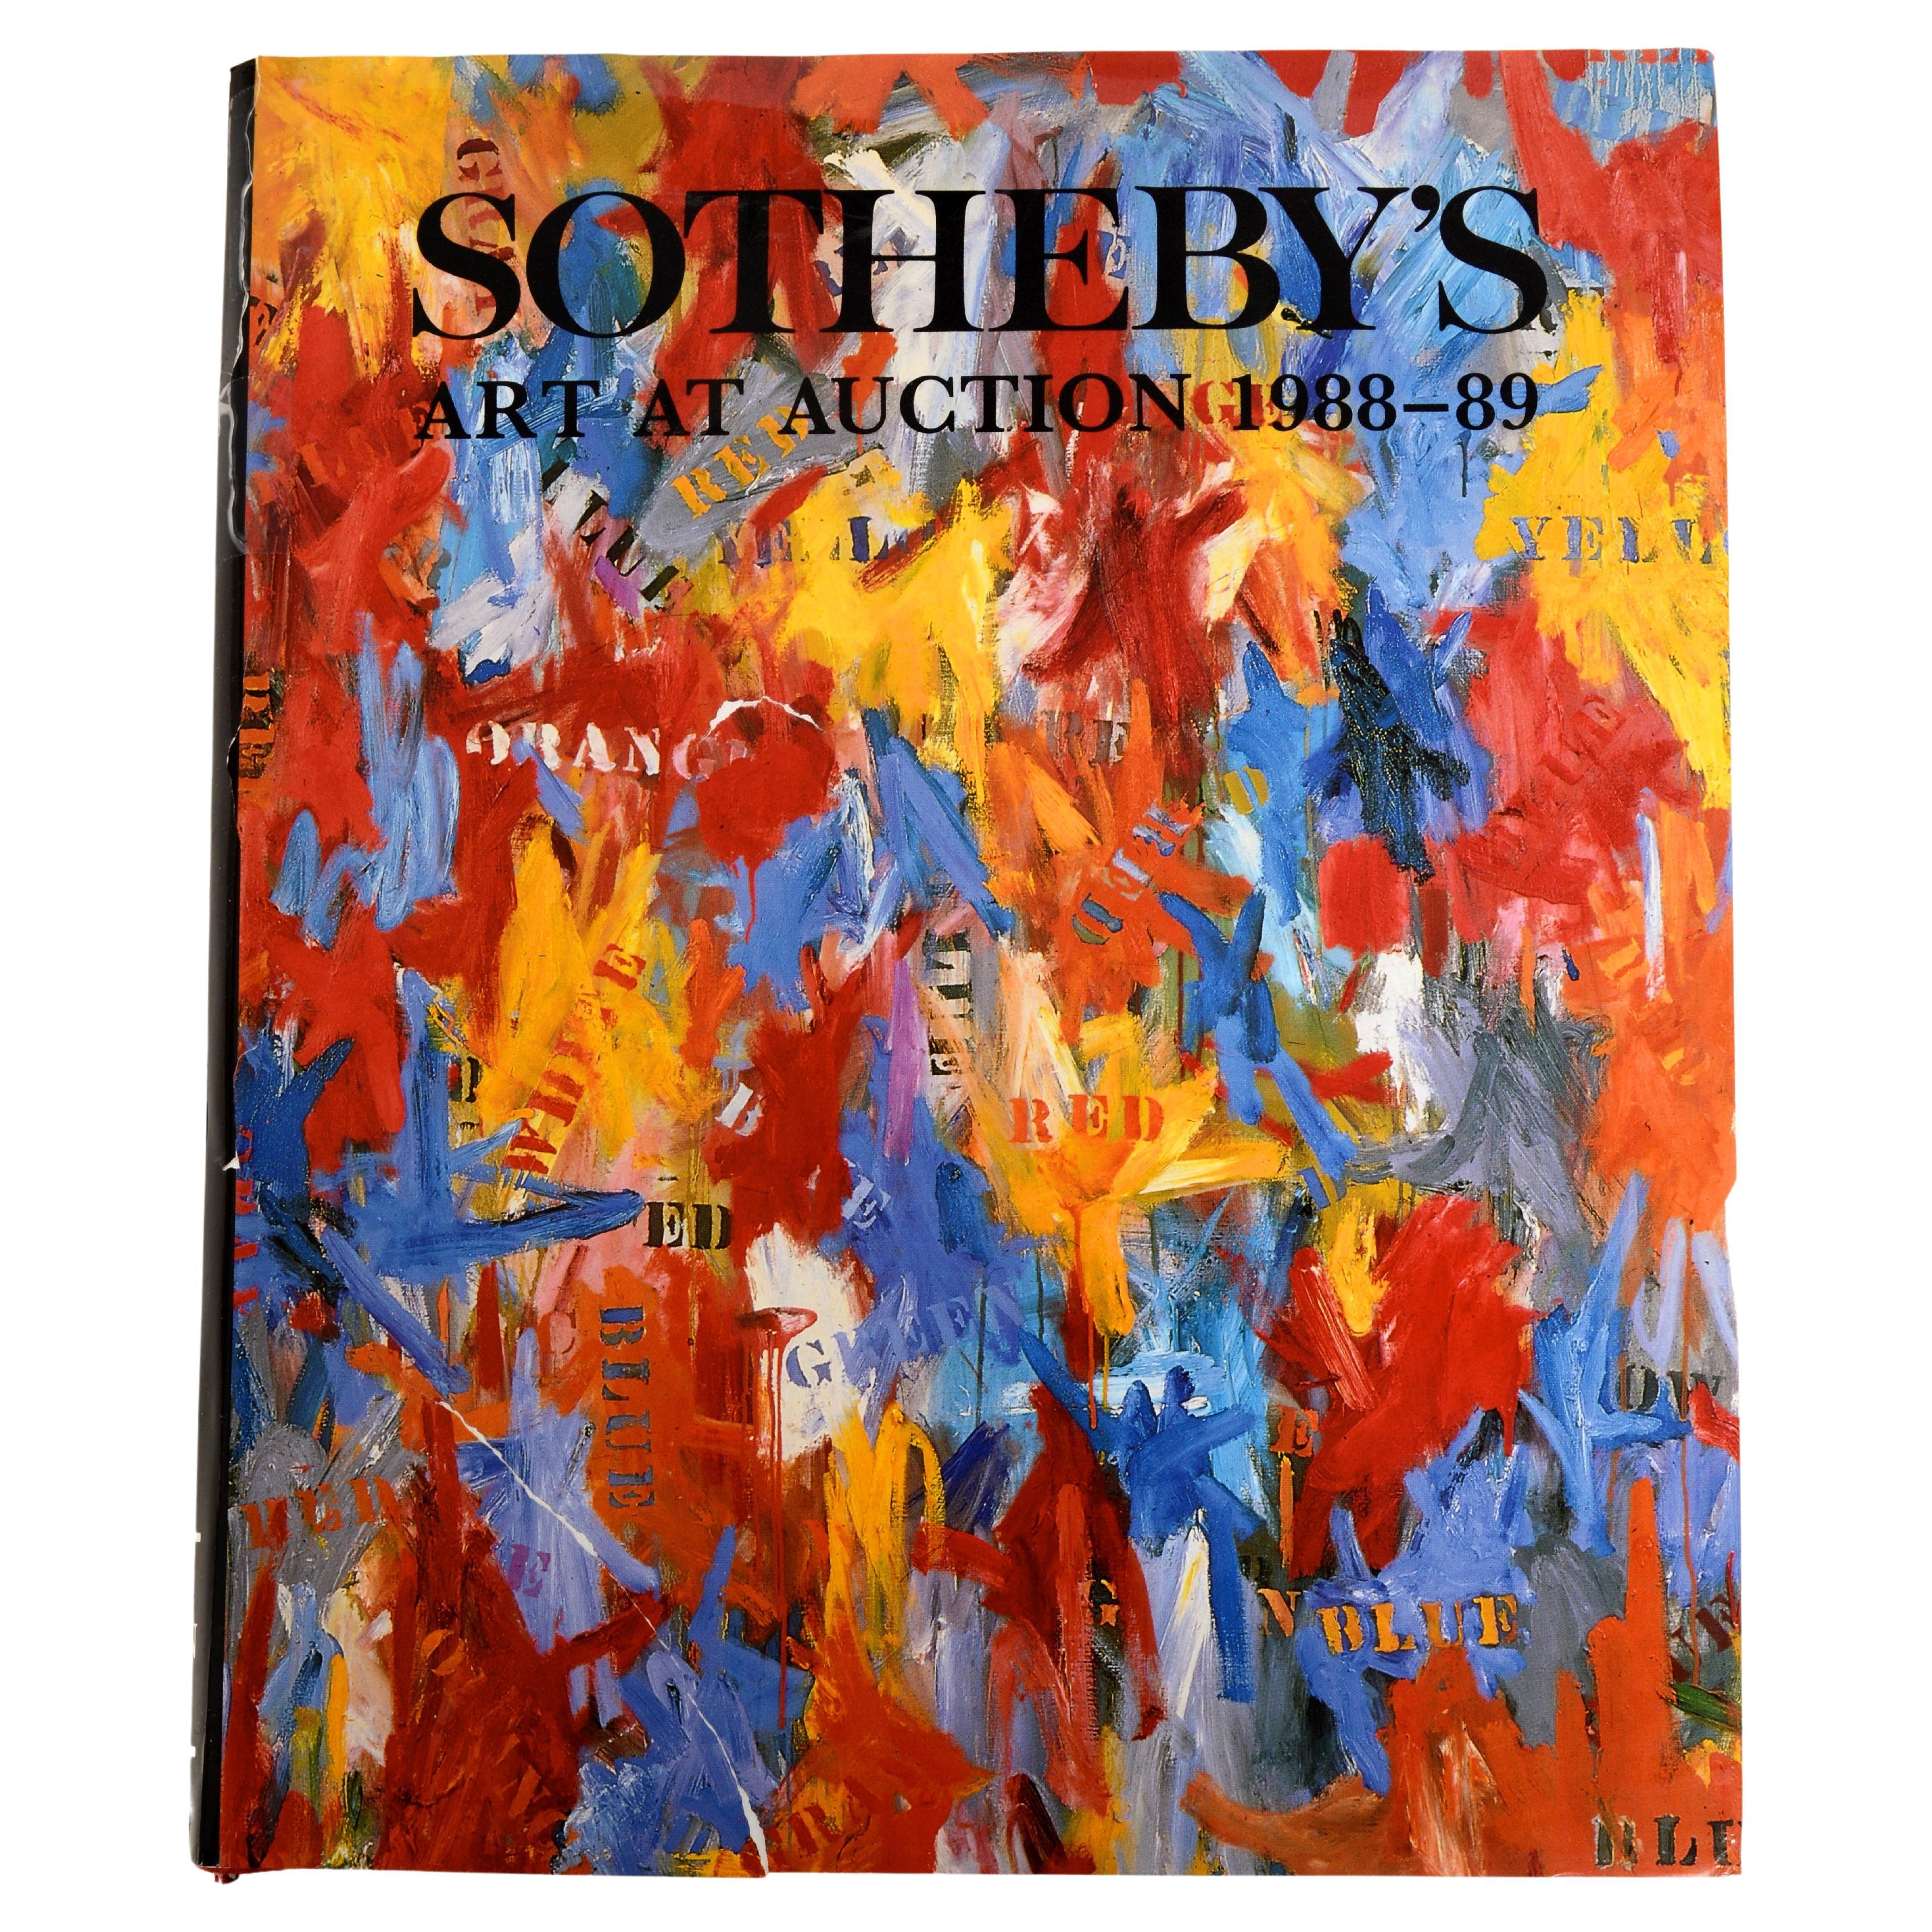 Sotheby's Art at Auction-1988-89 by Sally Liddell, 'Editor', Jasper Johns Cover For Sale